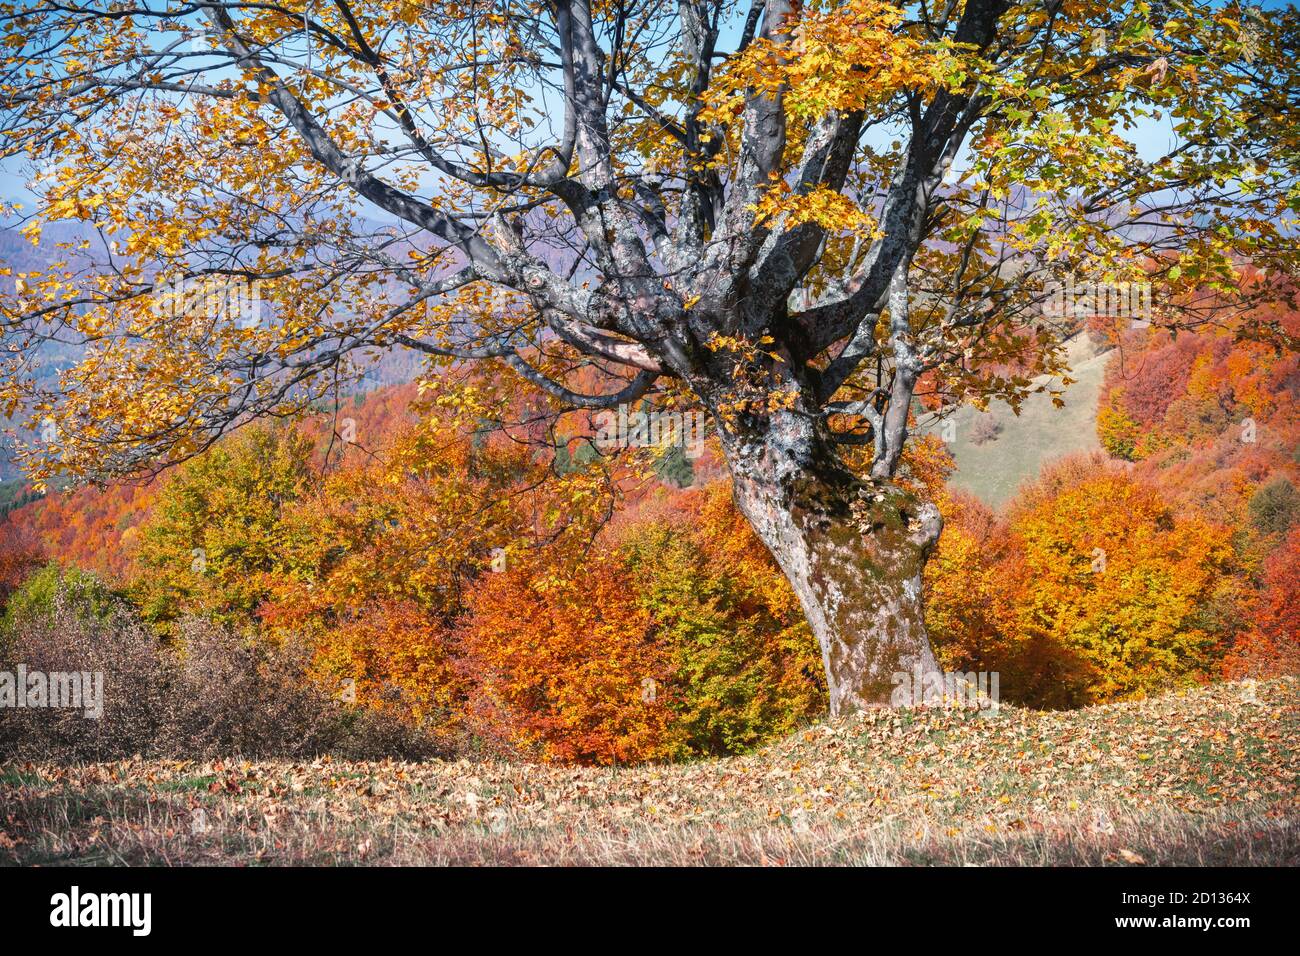 Majestic old beech tree with yellow and orange folliage at autumn forest. Picturesque fall scene in Carpathian mountains, Ukraine. Landscape photography Stock Photo